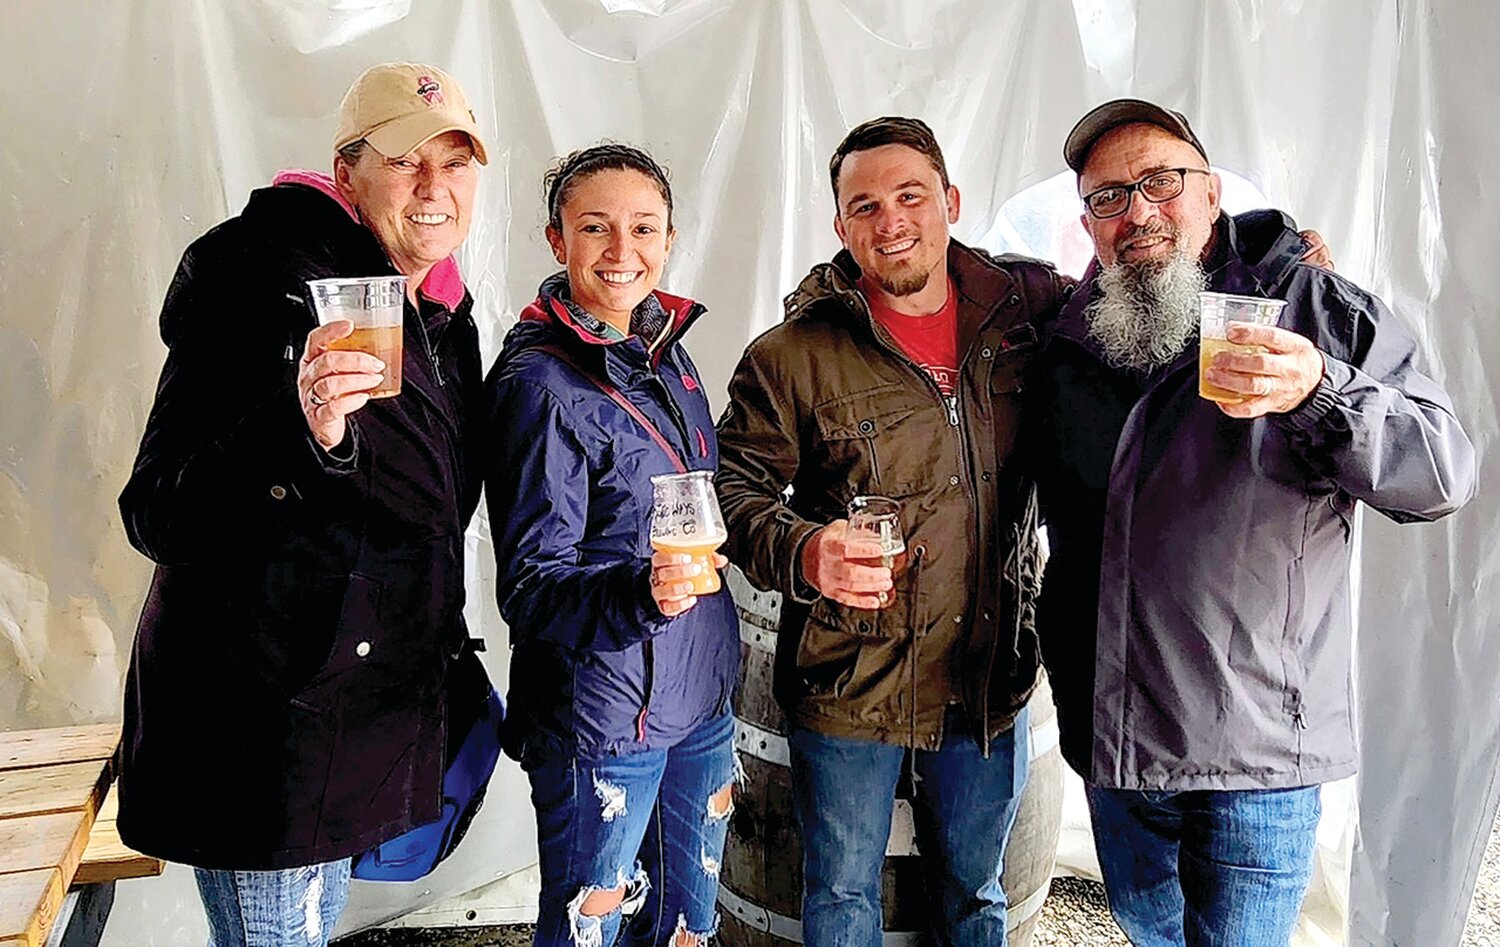 Kimberly Prentiss, newlyweds Kristina and Eric McCann, and Bill Prentiss keep dry under the beer garden tent.